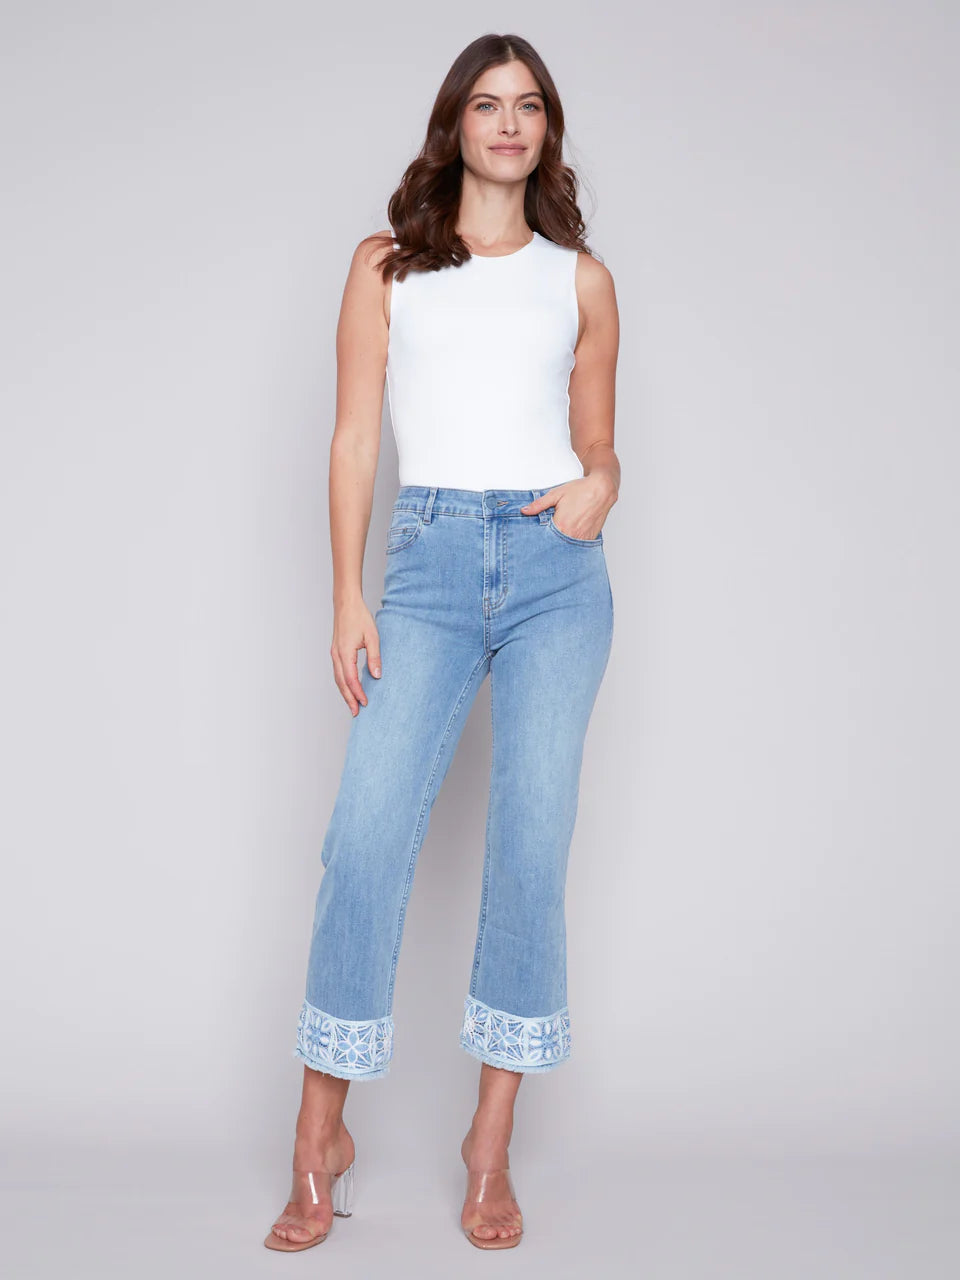 Charlie B Jeans with Crochet Cuff - Light Blue